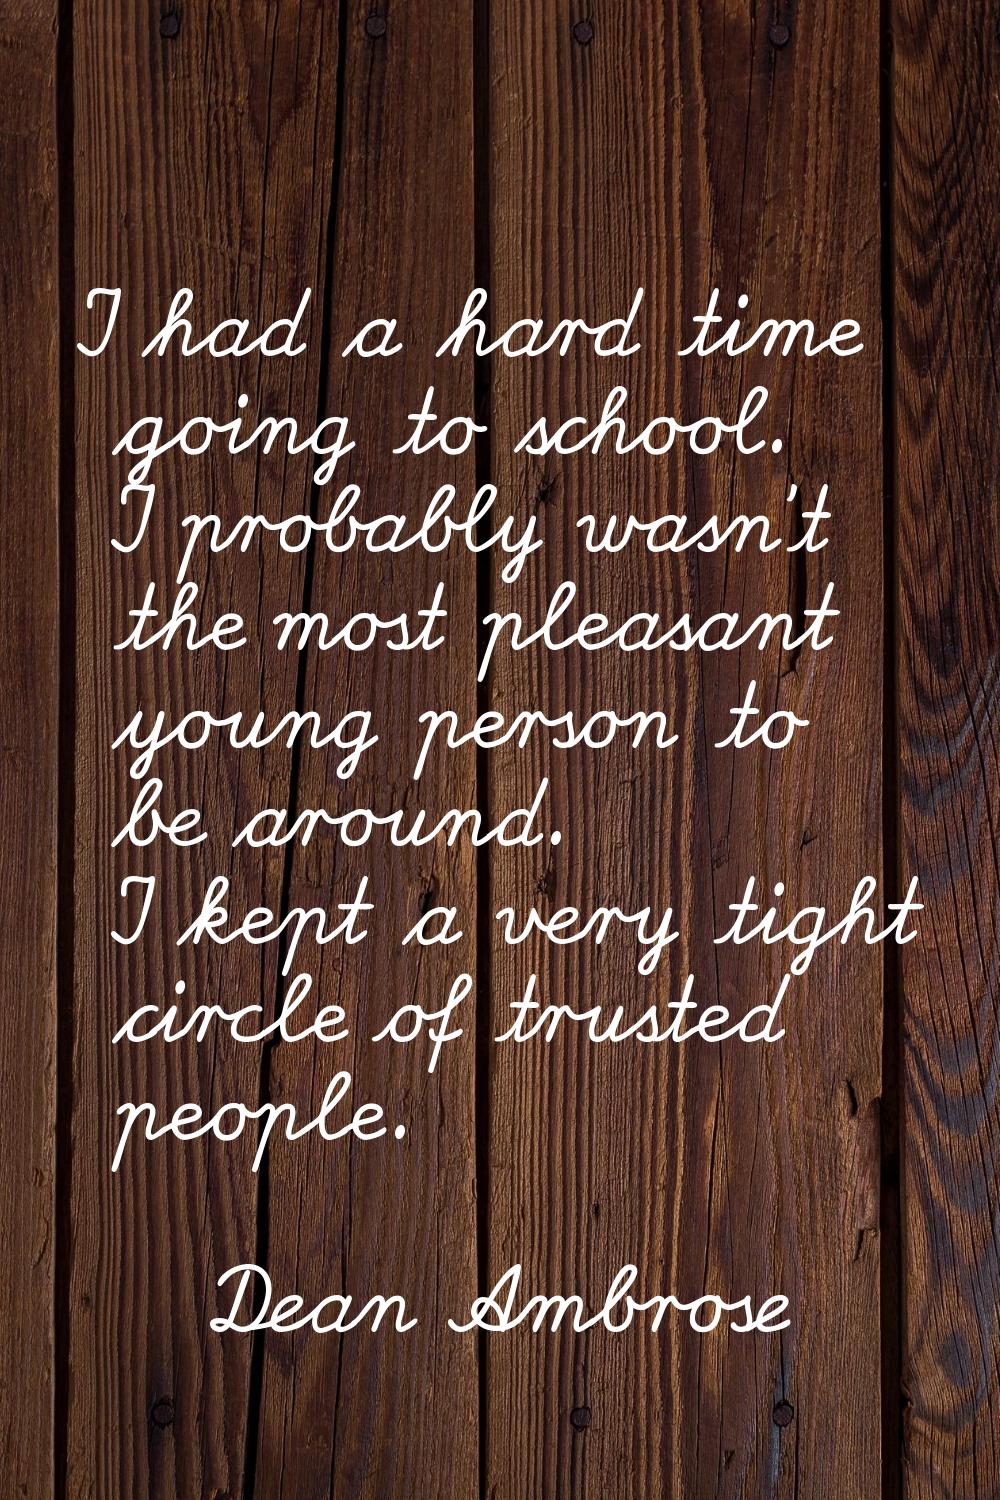 I had a hard time going to school. I probably wasn't the most pleasant young person to be around. I